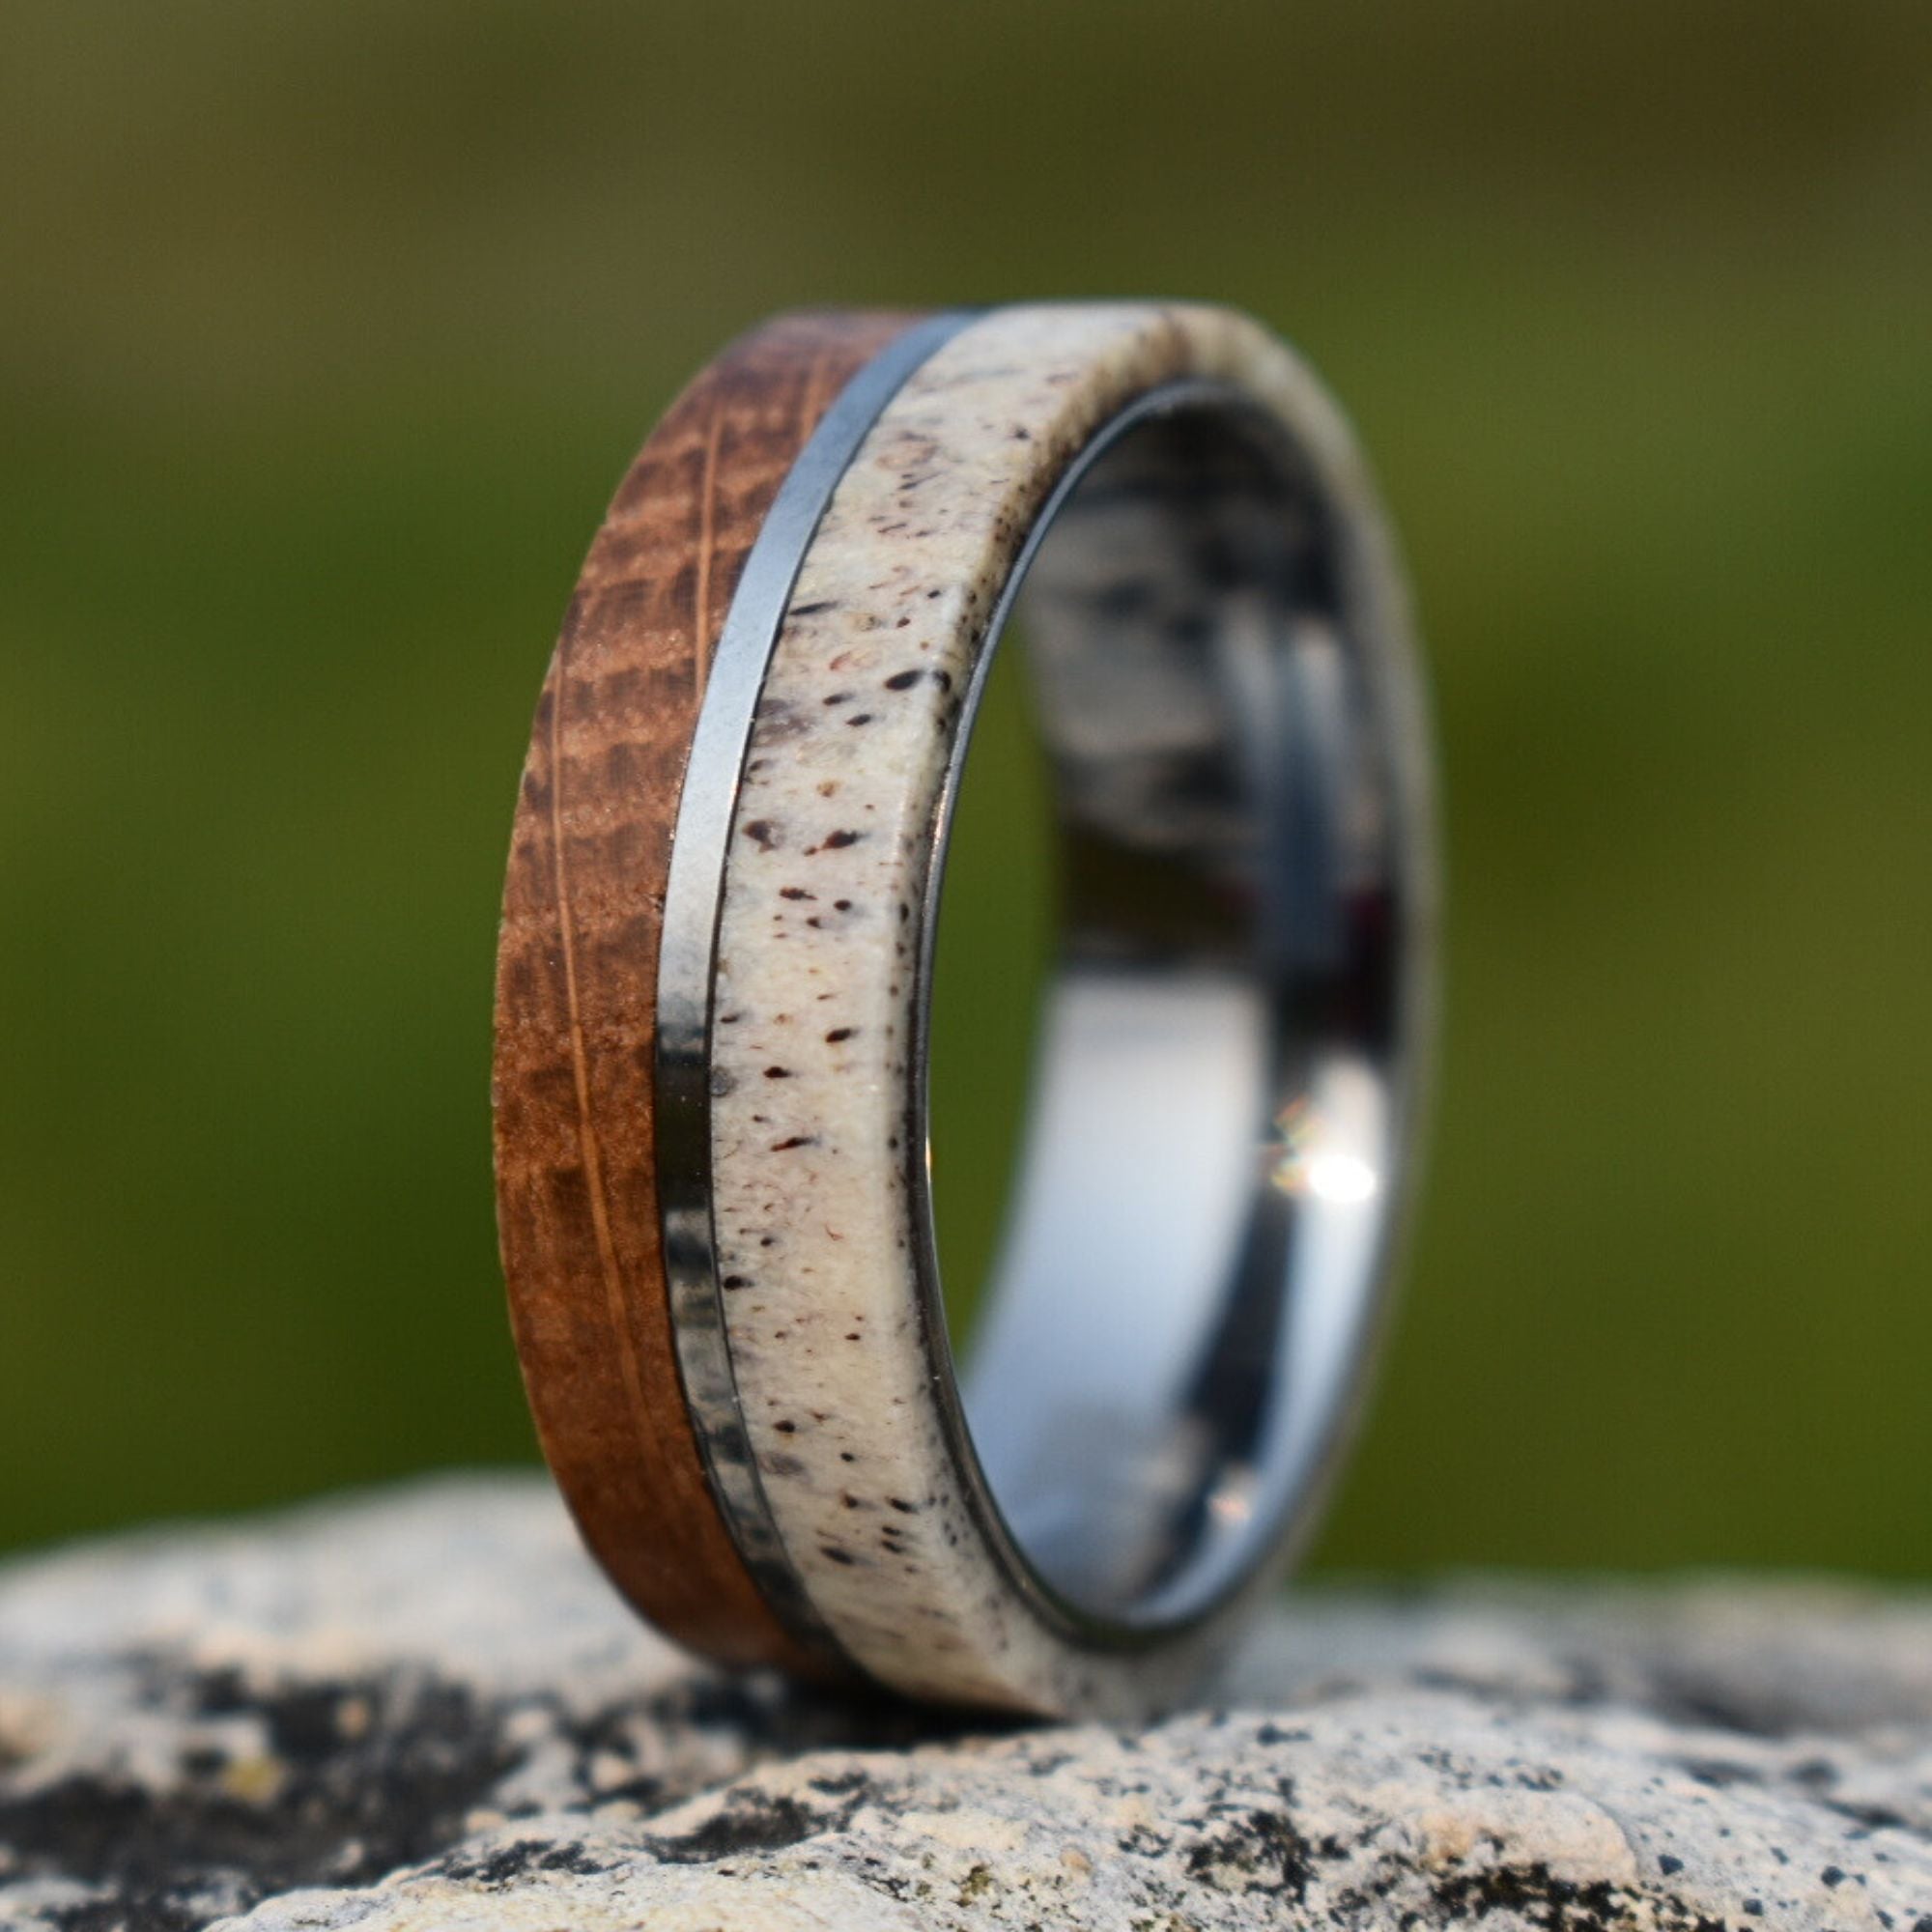 Wooden Rings: Pack of 8 From 1.00 GBP